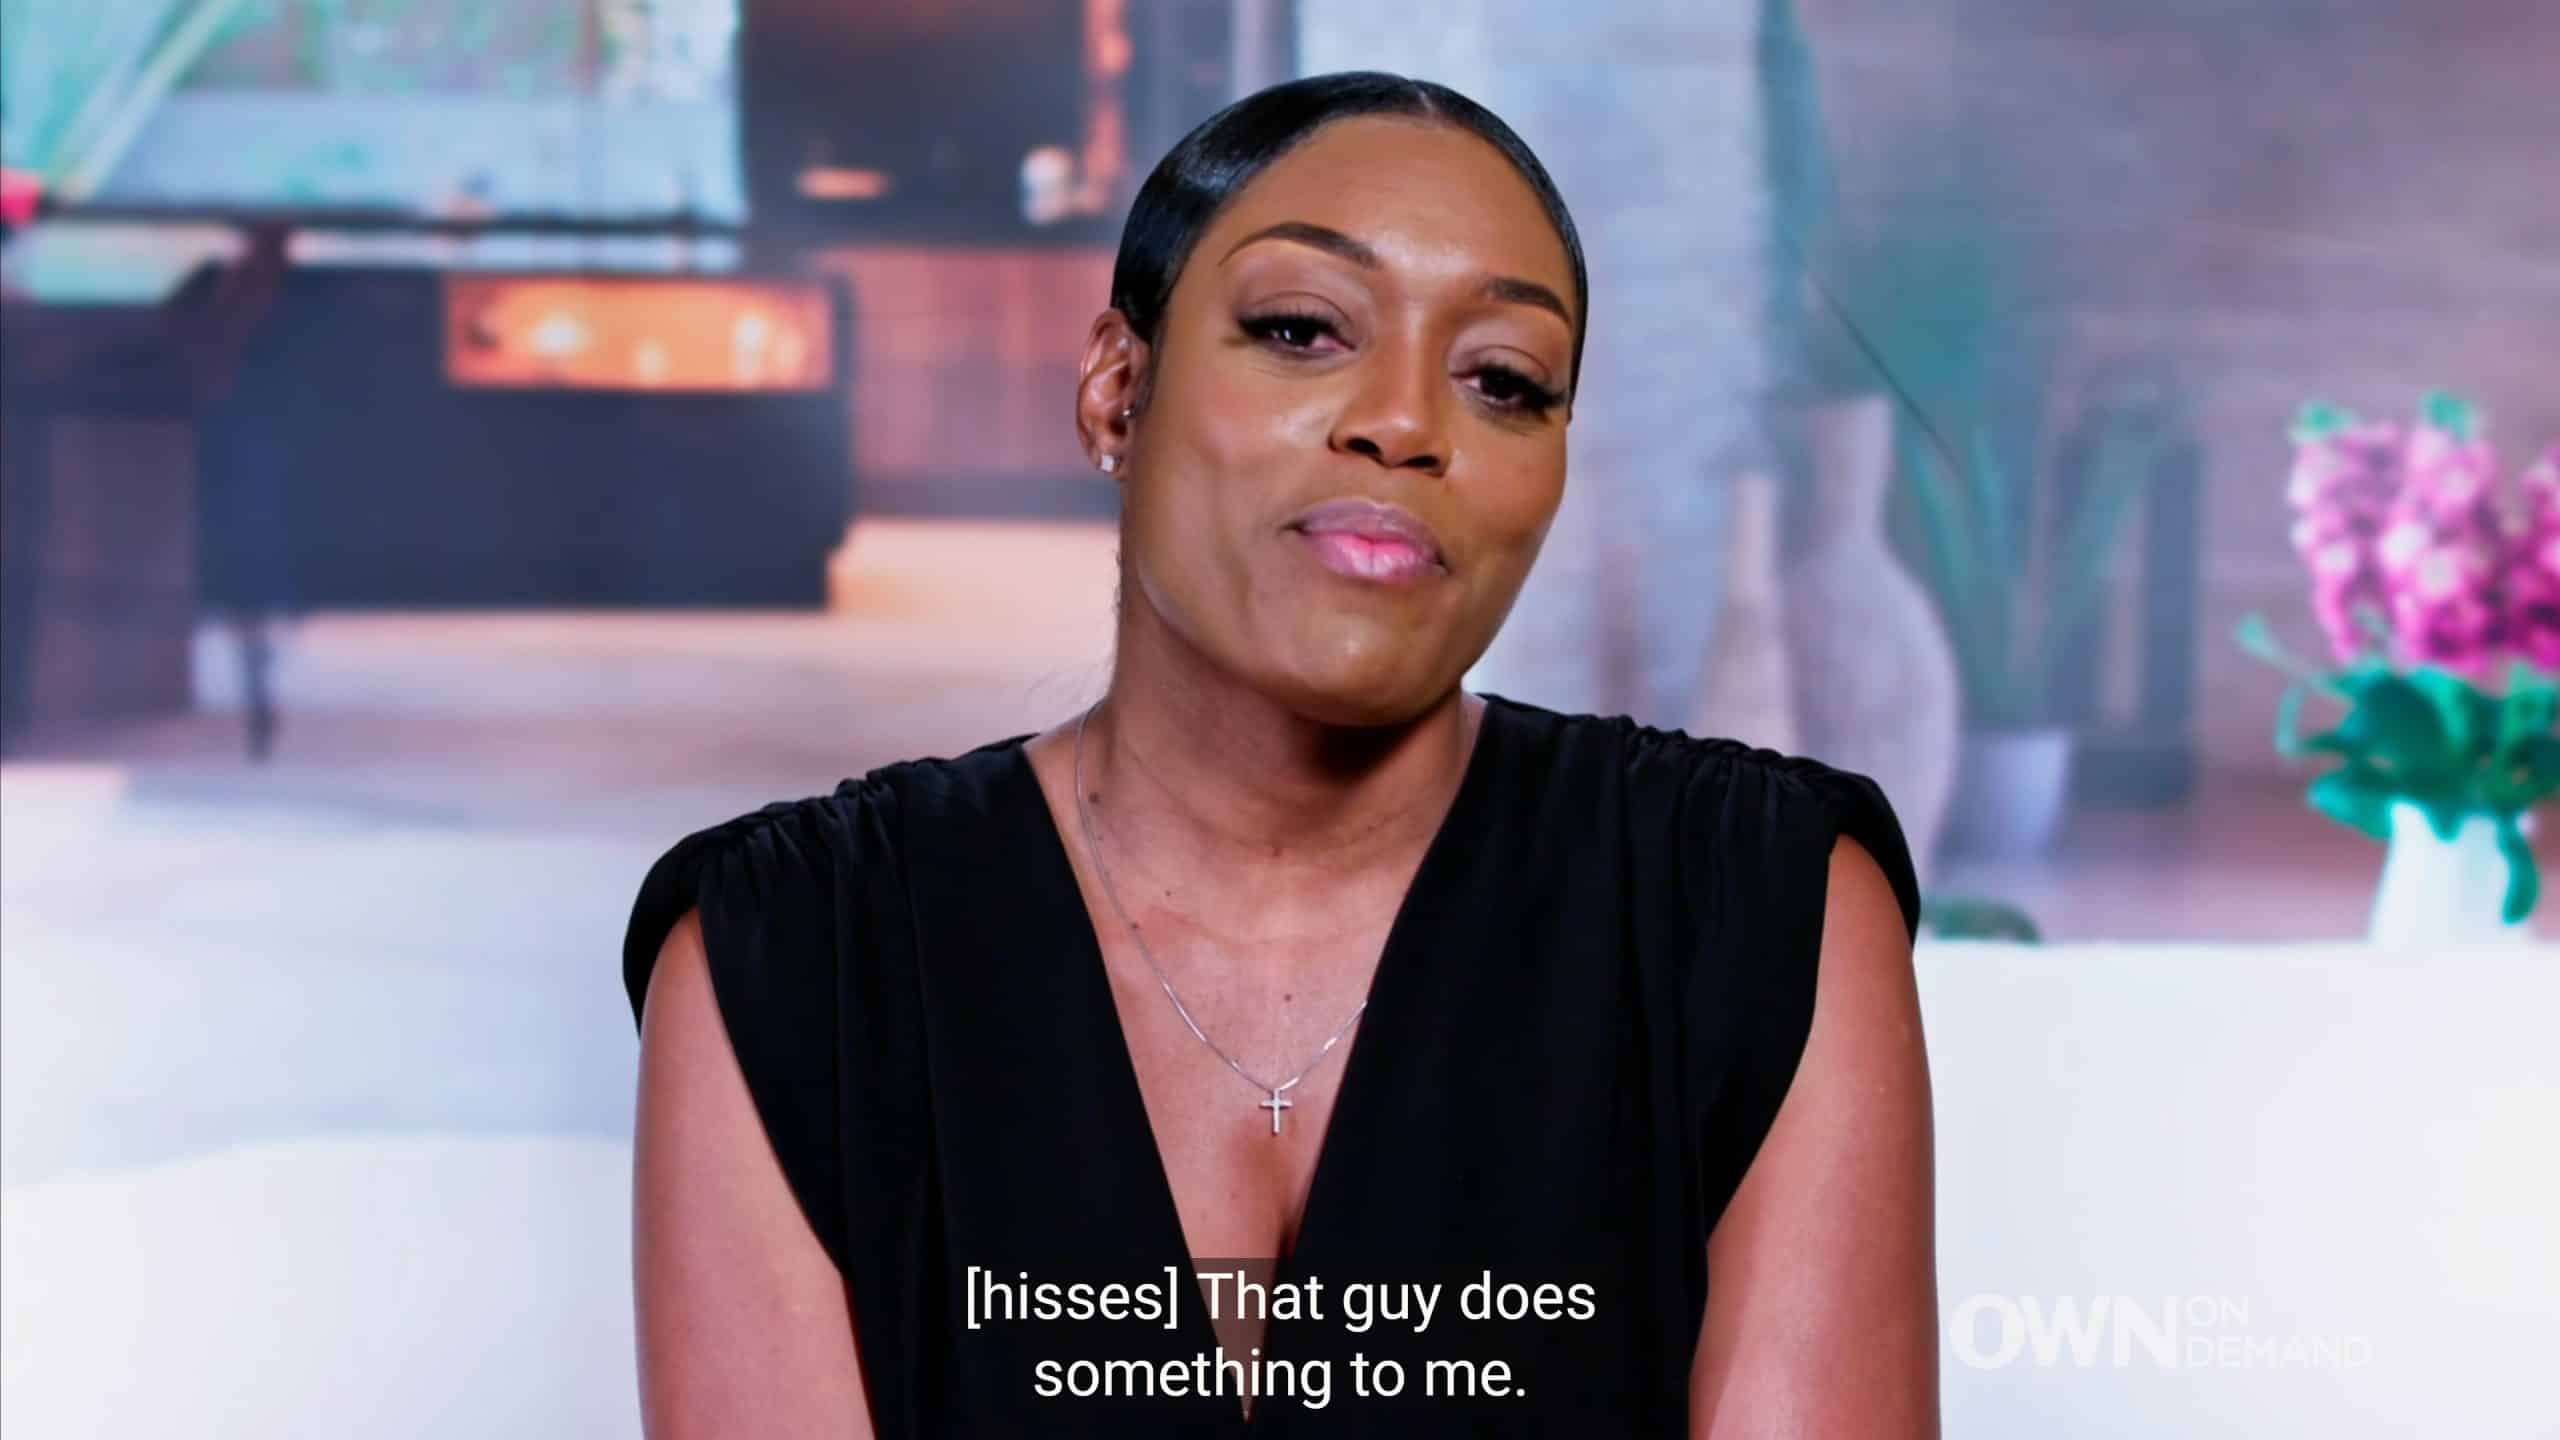 Cynthia talking about Andre